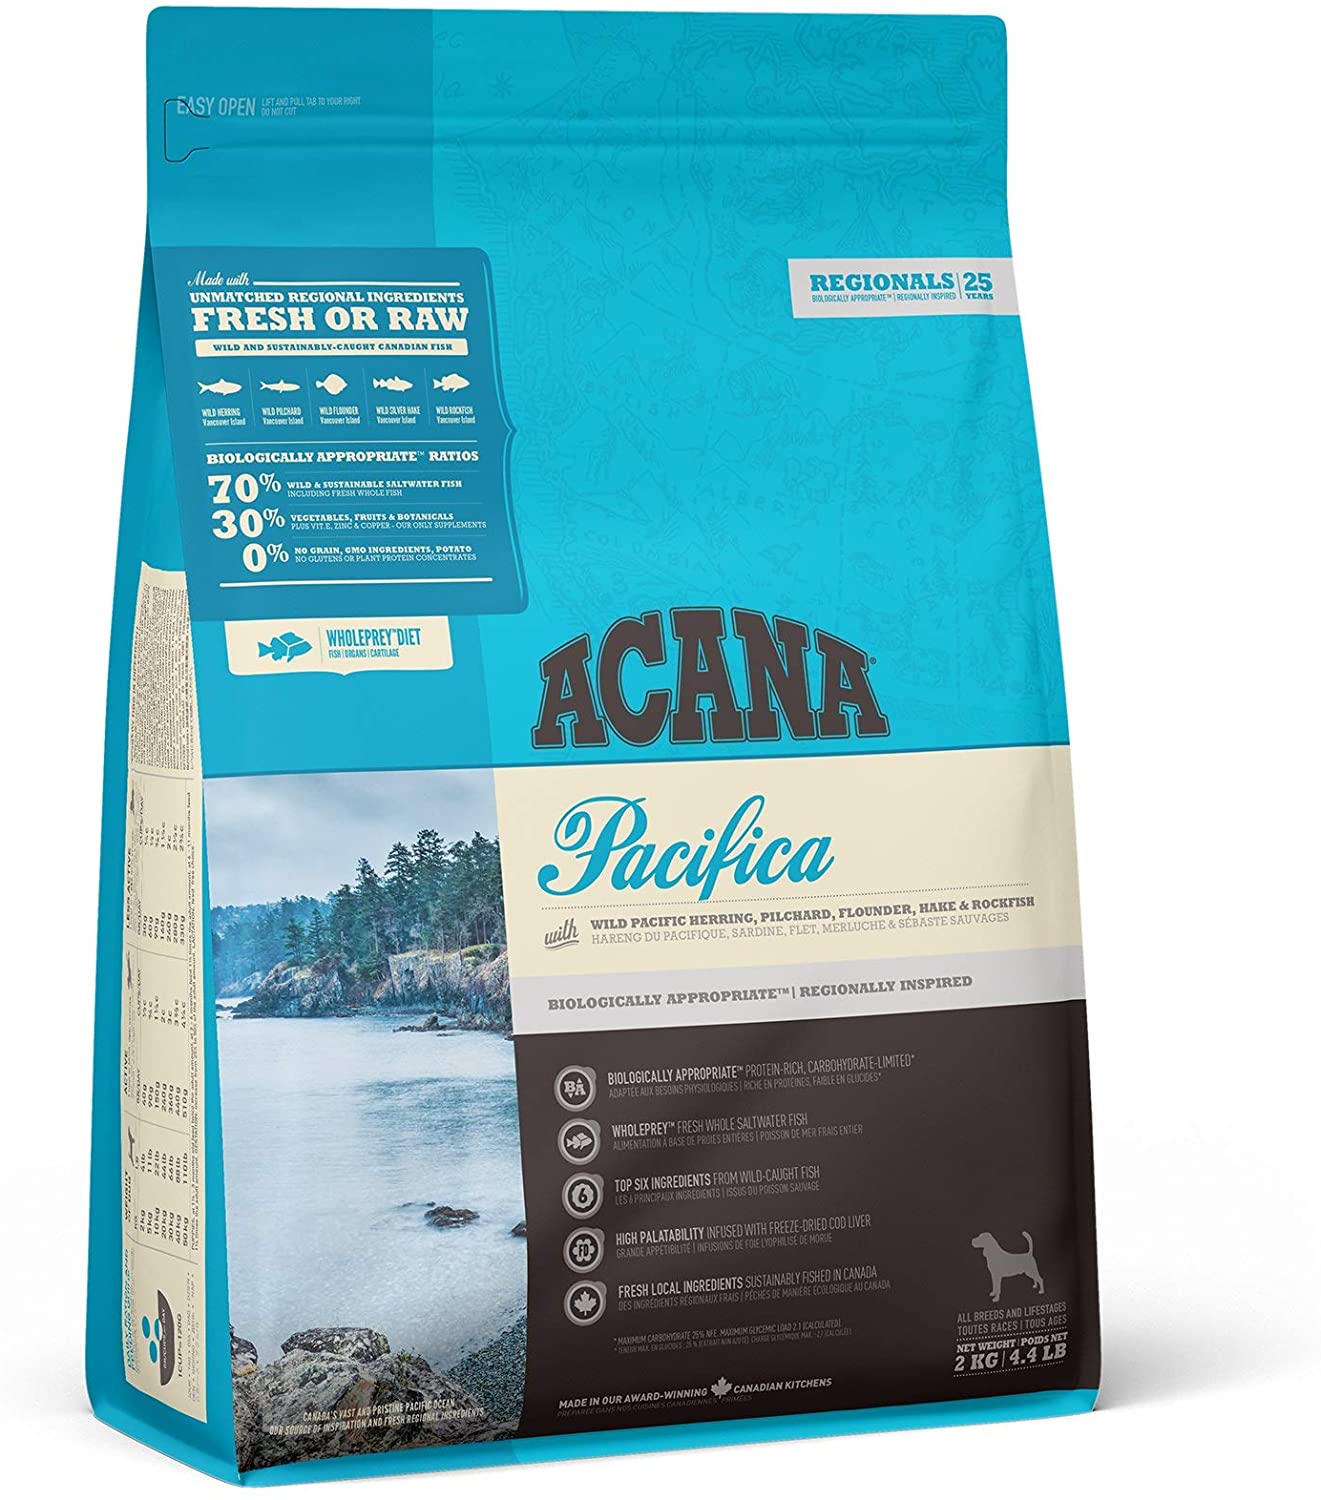 ACANA Pacifica Grain-free 340G for Dog 2kg from Japan 6228 画像2